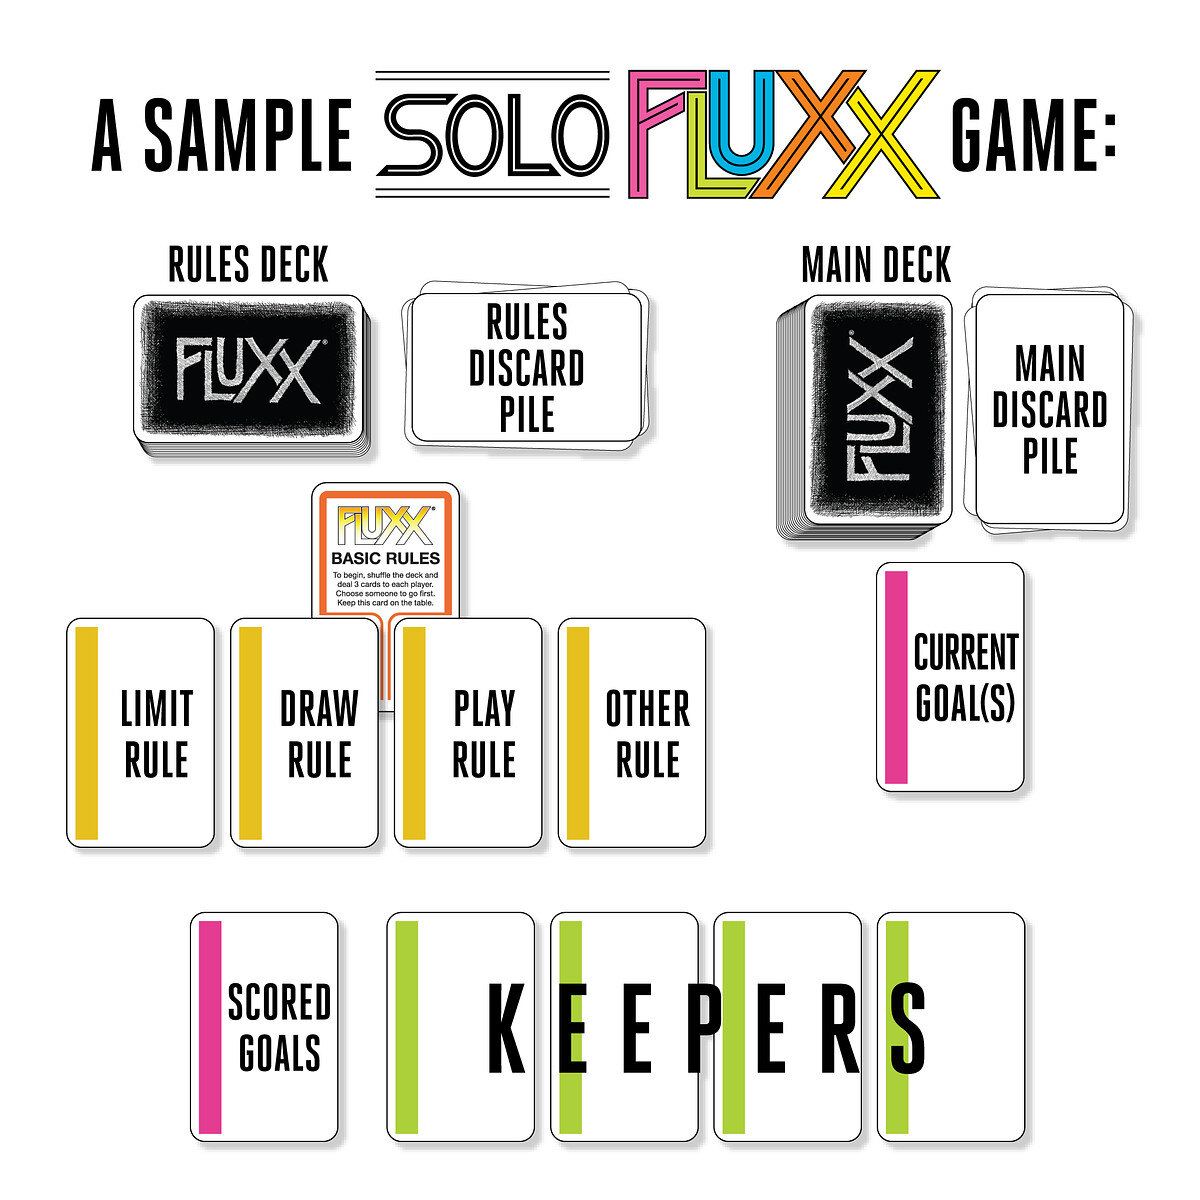 Looking for a #game to play Solo? Everything you need to get started playing any edition of Fluxx solo is right here on the Solo Fluxx web page: hubs.la/Q02yKb4z0 Add to the fun by entering your scores on the Game Play Stats chart & see what other solo gamers have achieved!